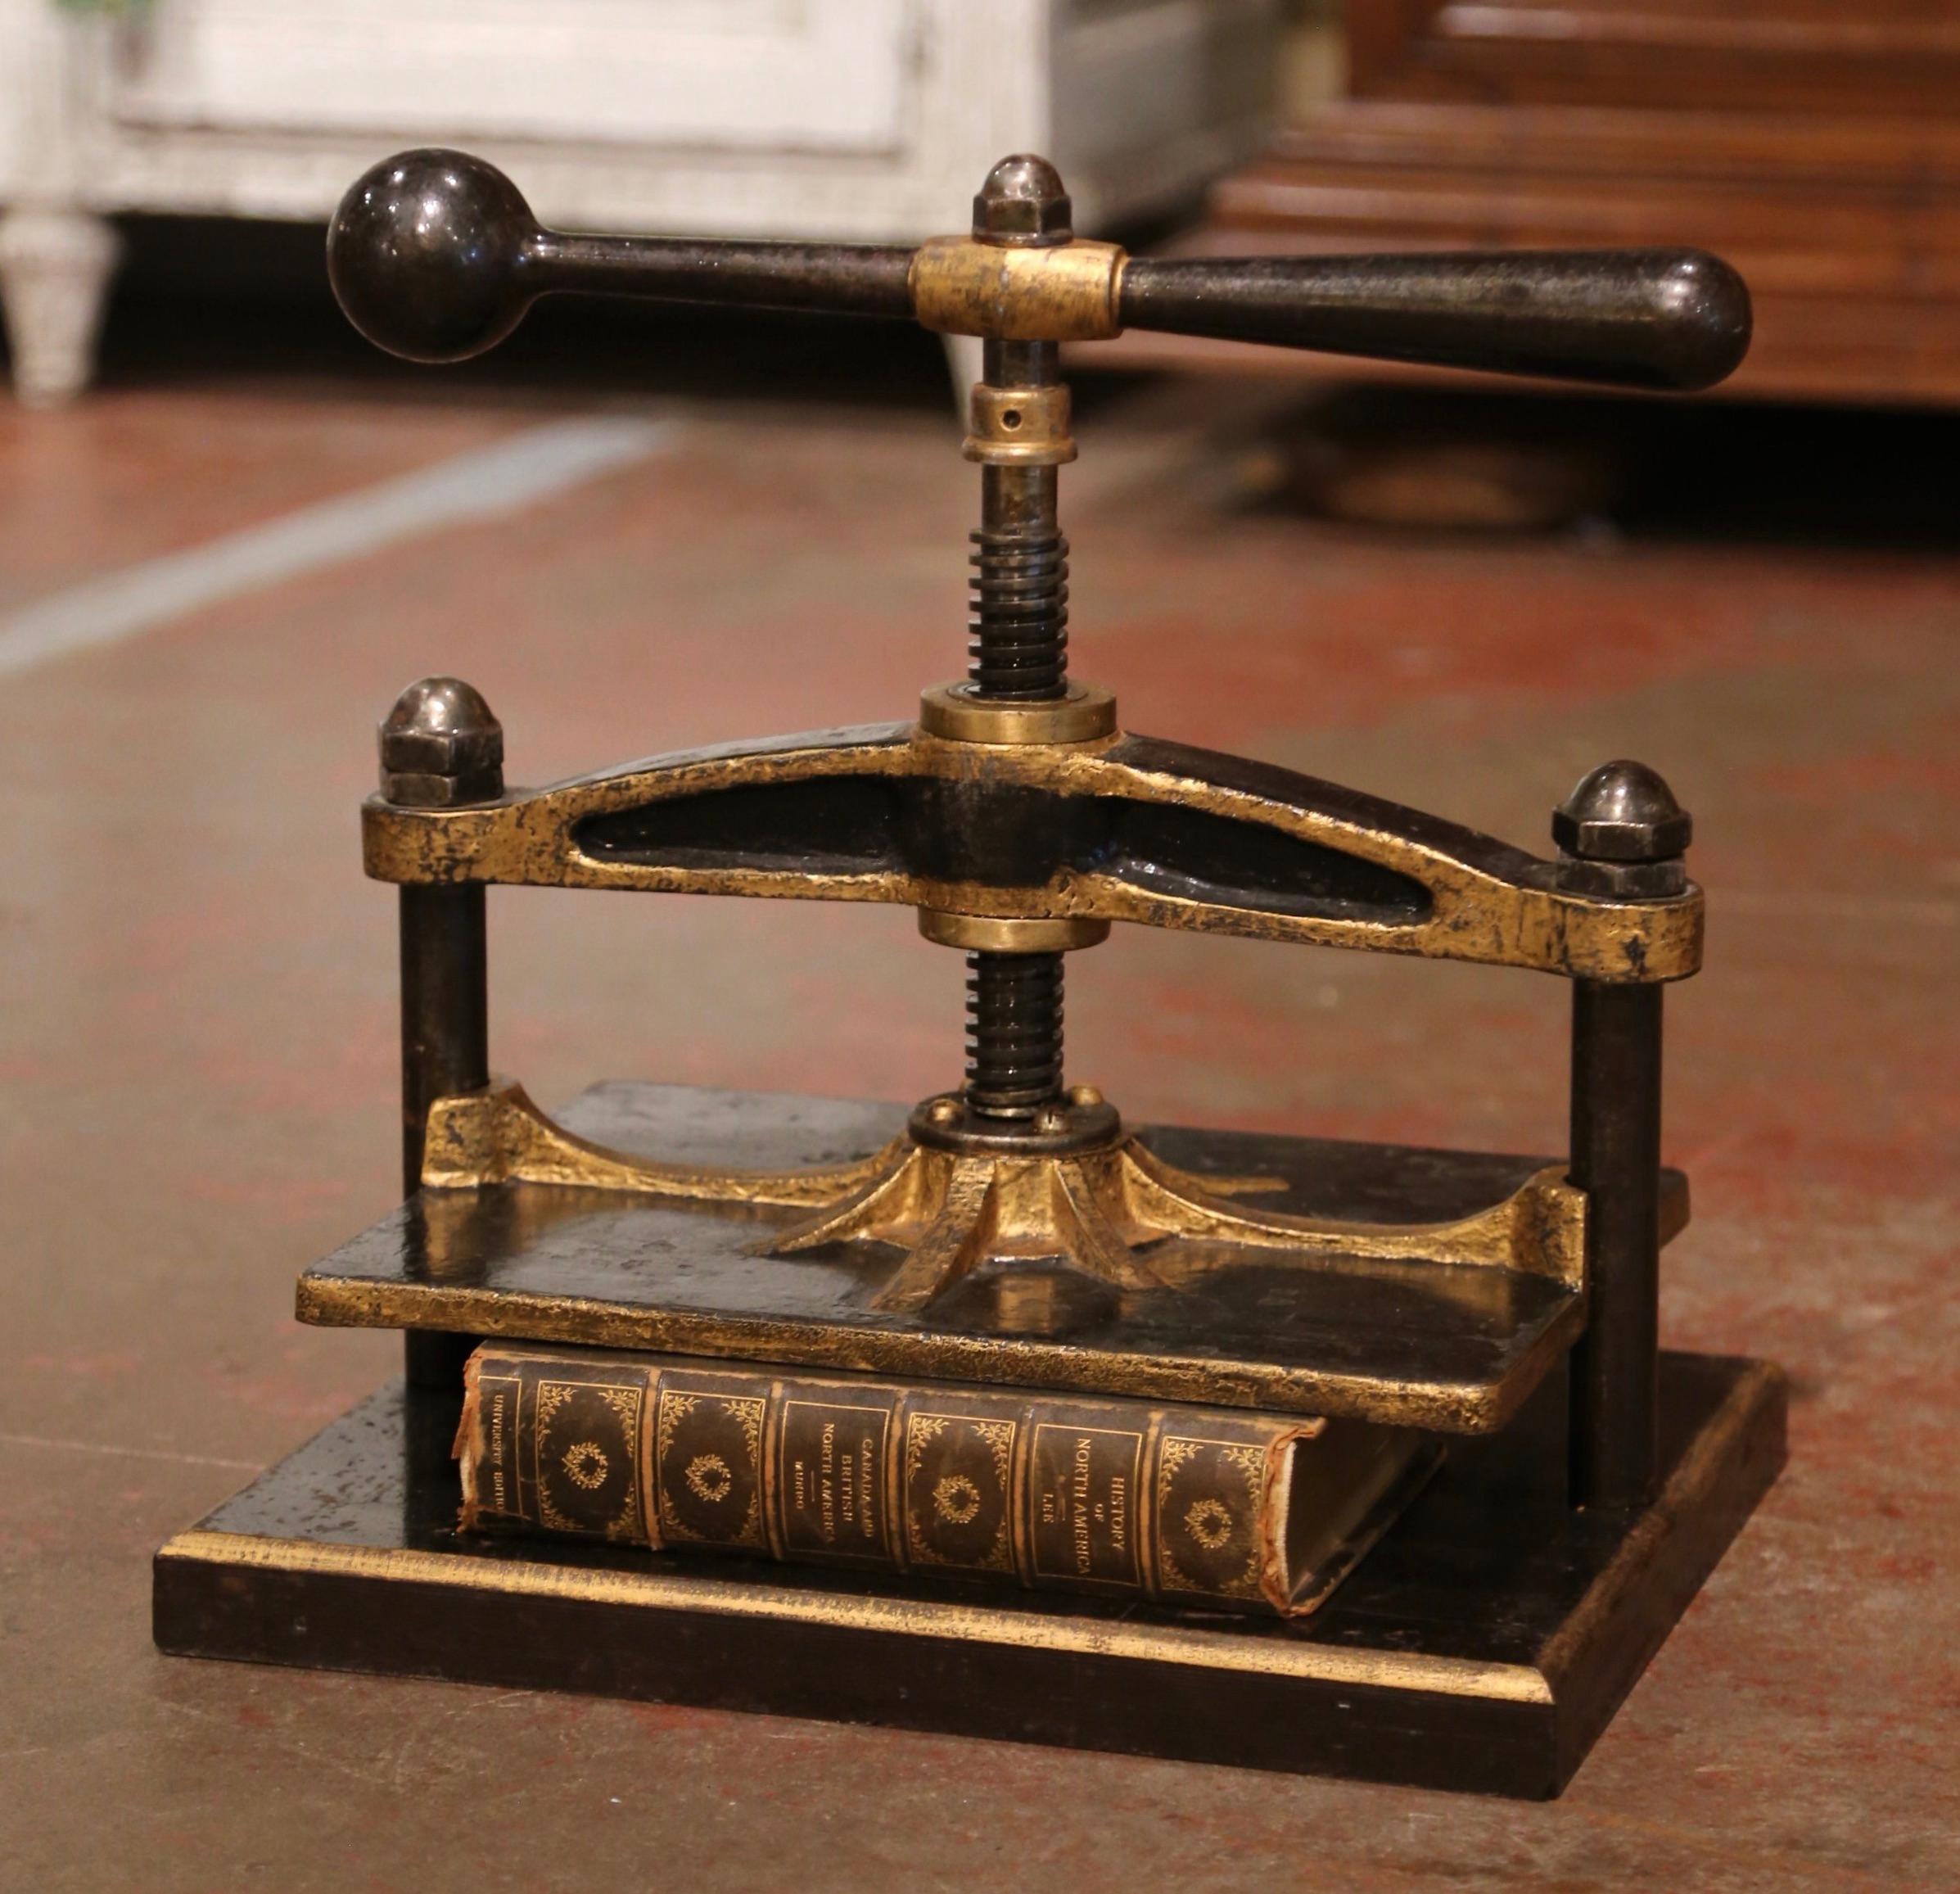 This antique paper binding press was forged in France, circa 1870. The Classic 